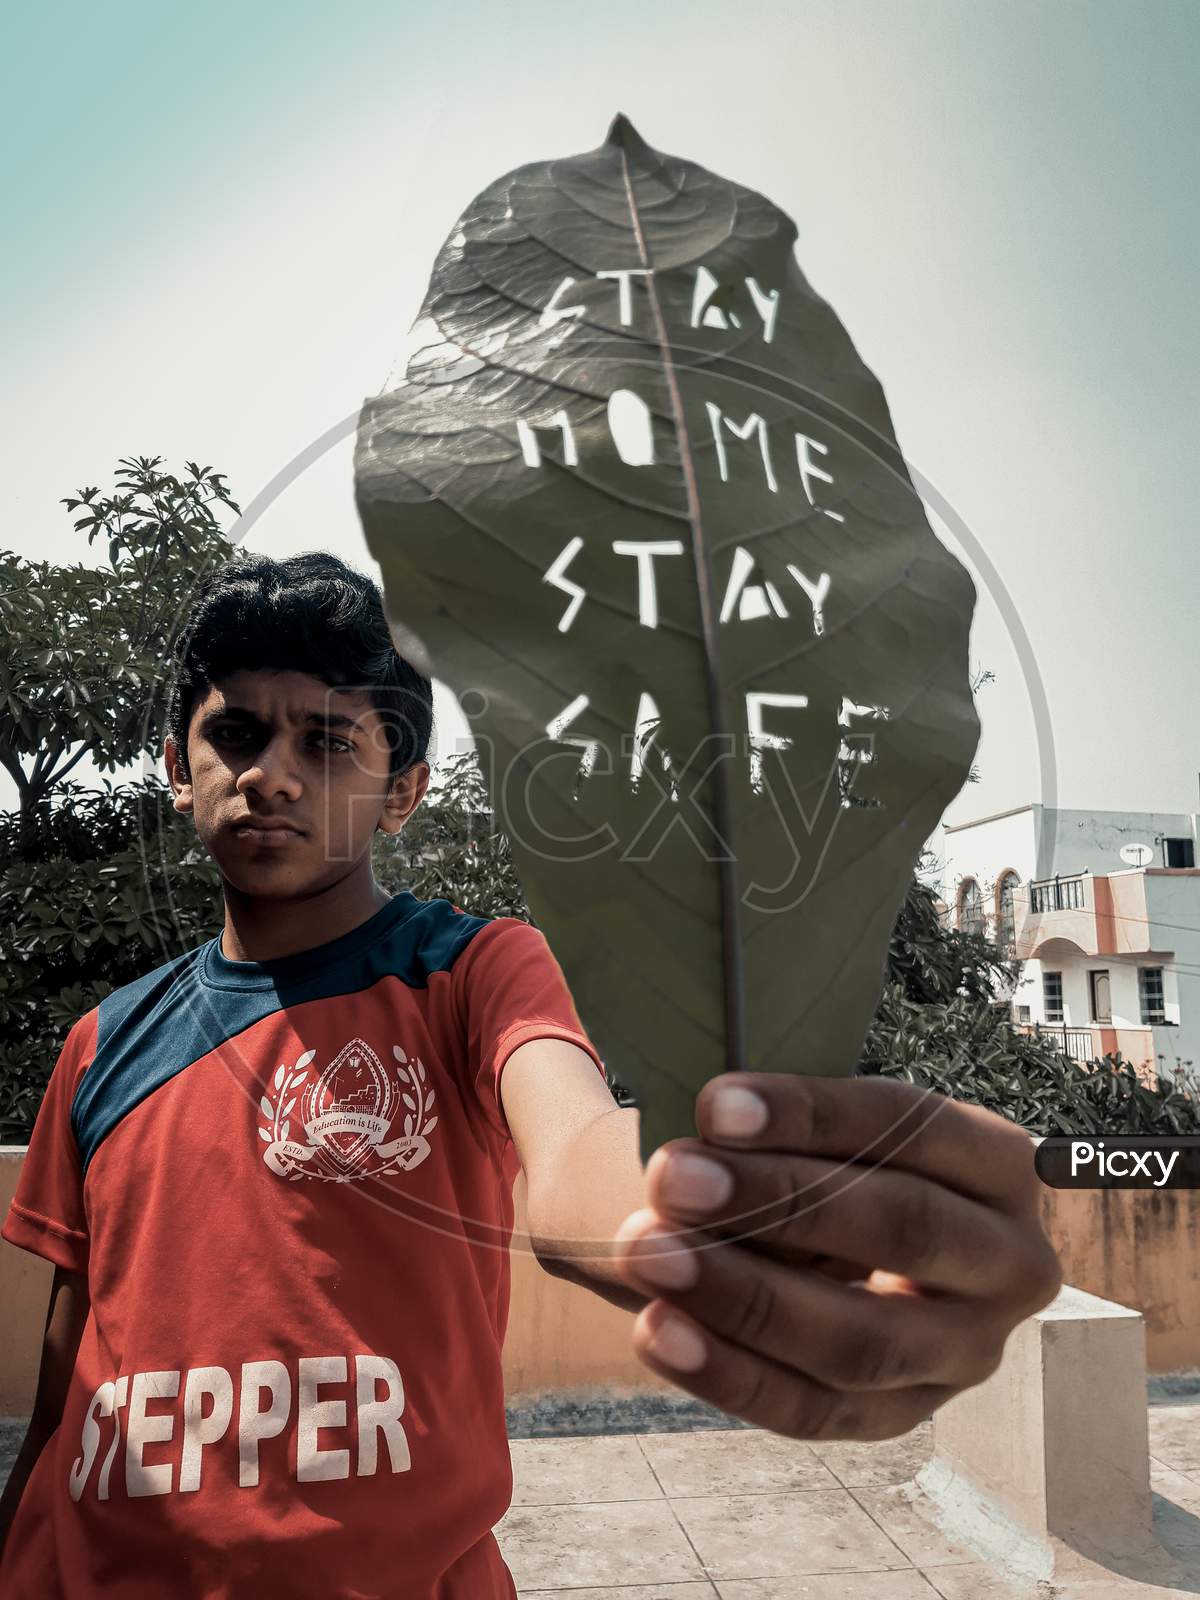 Stay safe stay home quote on leaf